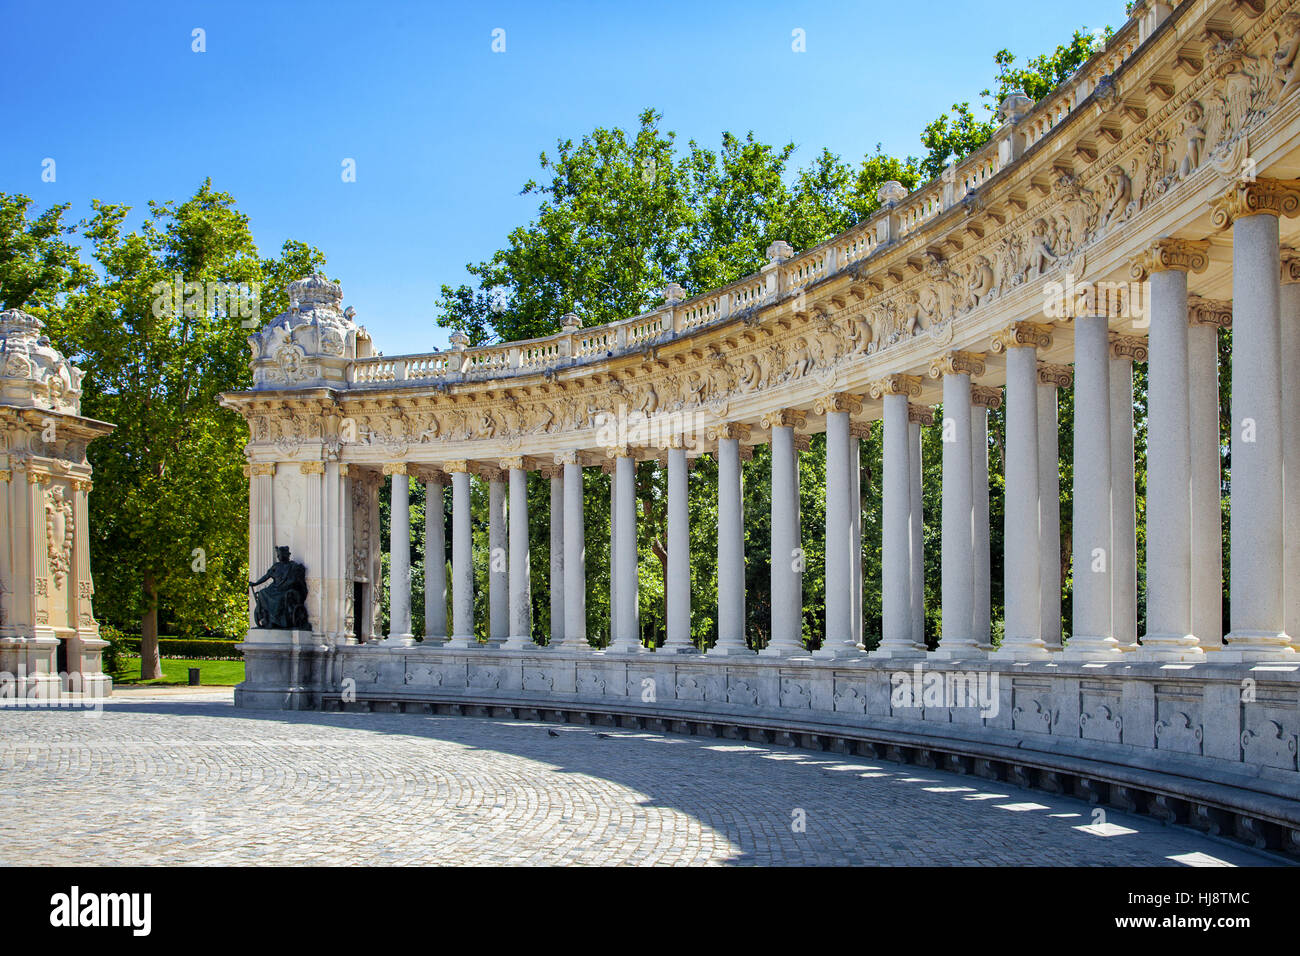 Grand Colonnade of Monument to Alfonso XII, Buen Retiro Park, Madrid, Spain Stock Photo